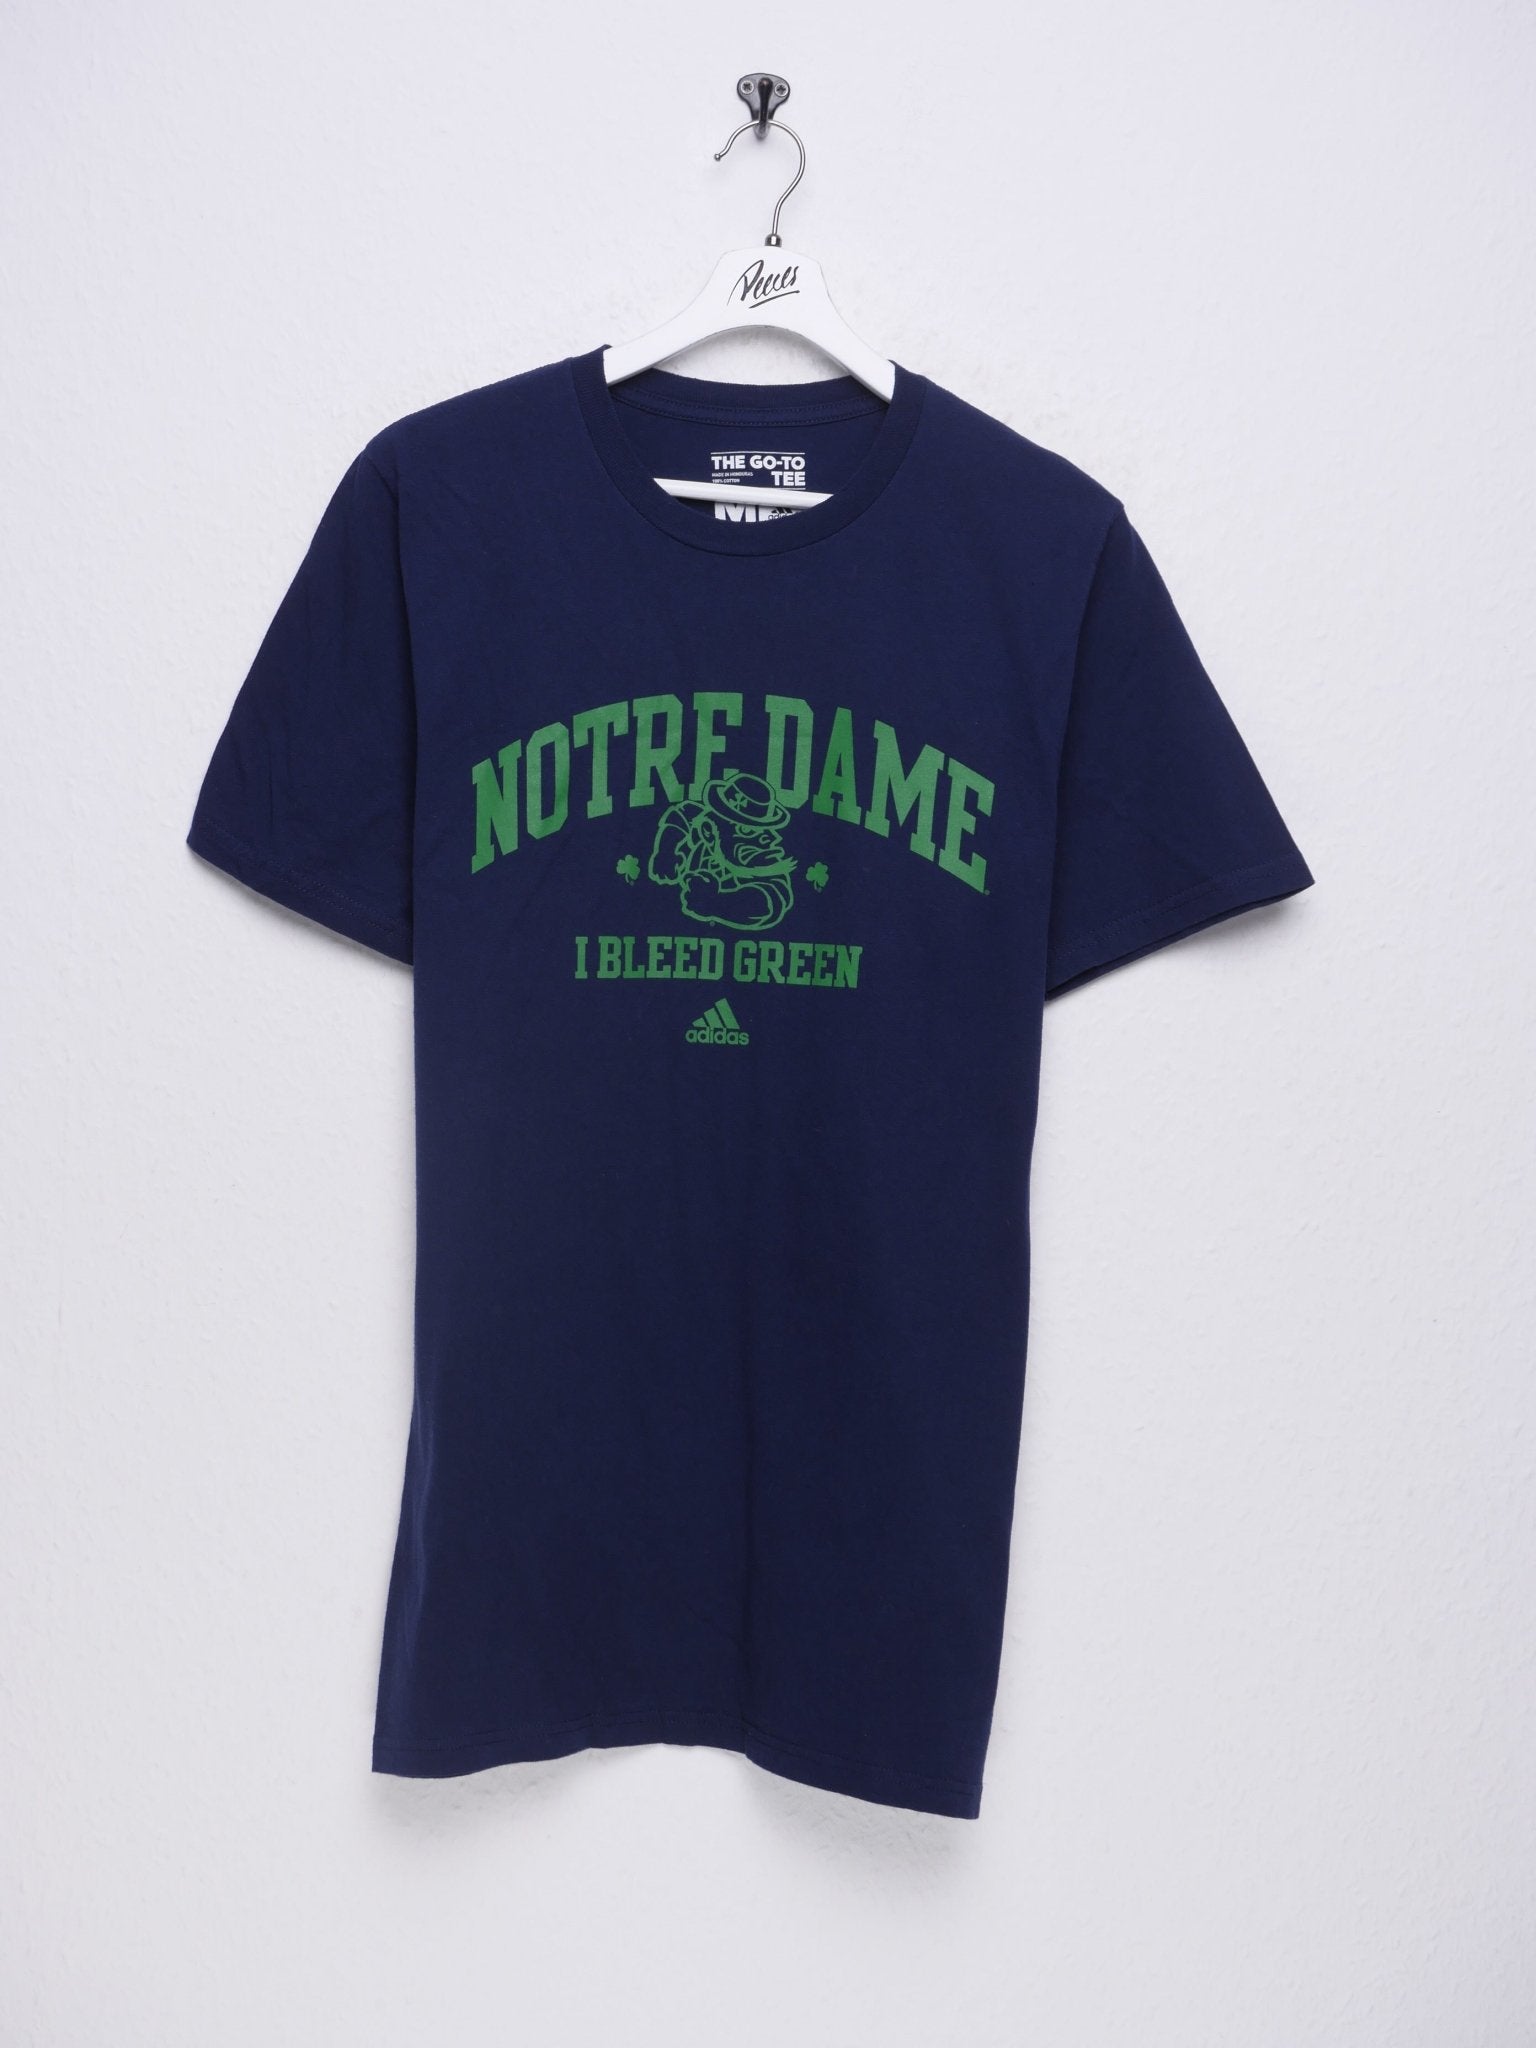 Adidas printed Notre Dame Spellout Vintage Shirt - Peeces